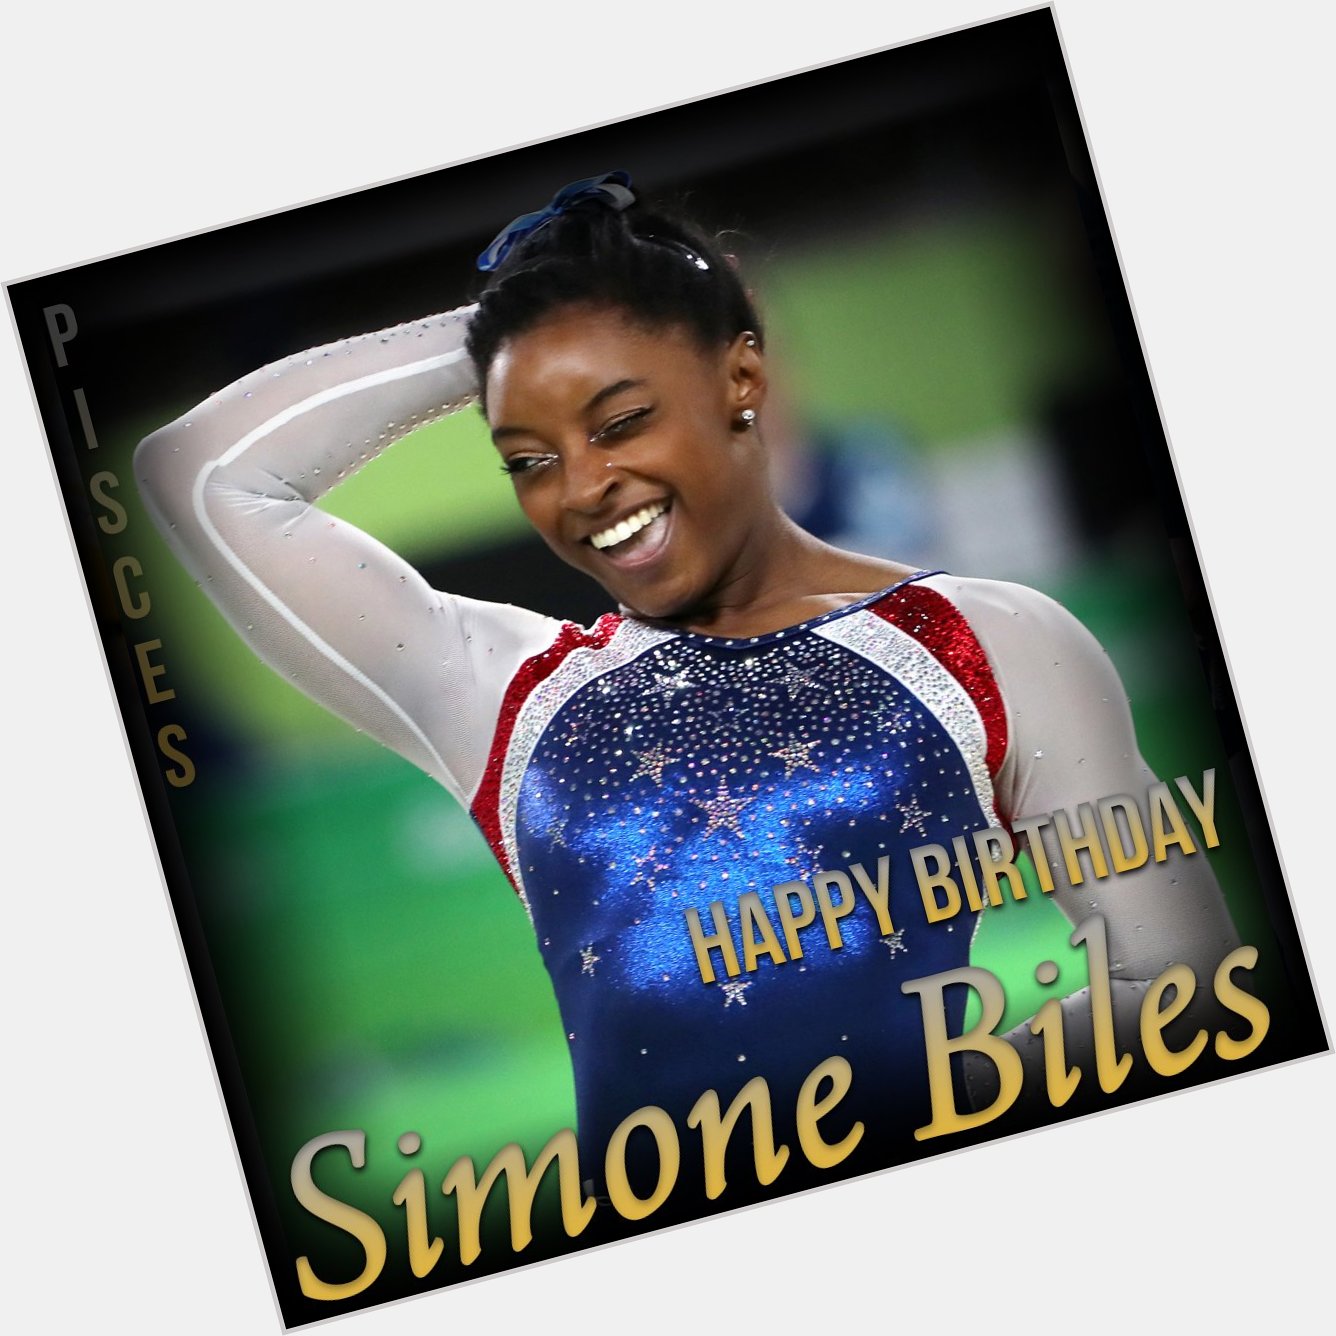 Happy Birthday to Simone Biles! The Olympian turns 22 years old today. 